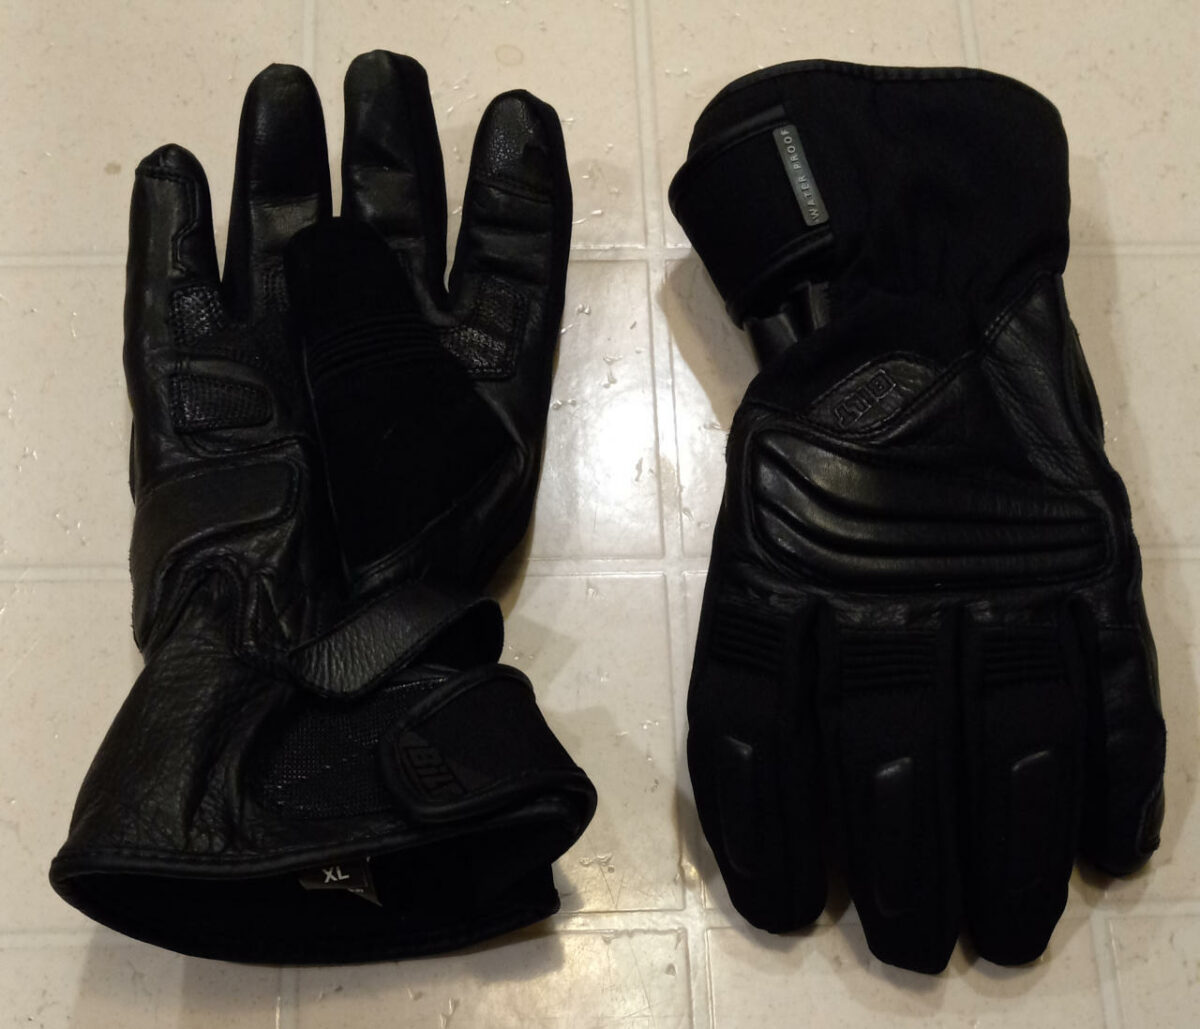 Once you find where to buy Motorcycle Gloves, pick up gloves for different seasons.  My Winter Riding gloves.